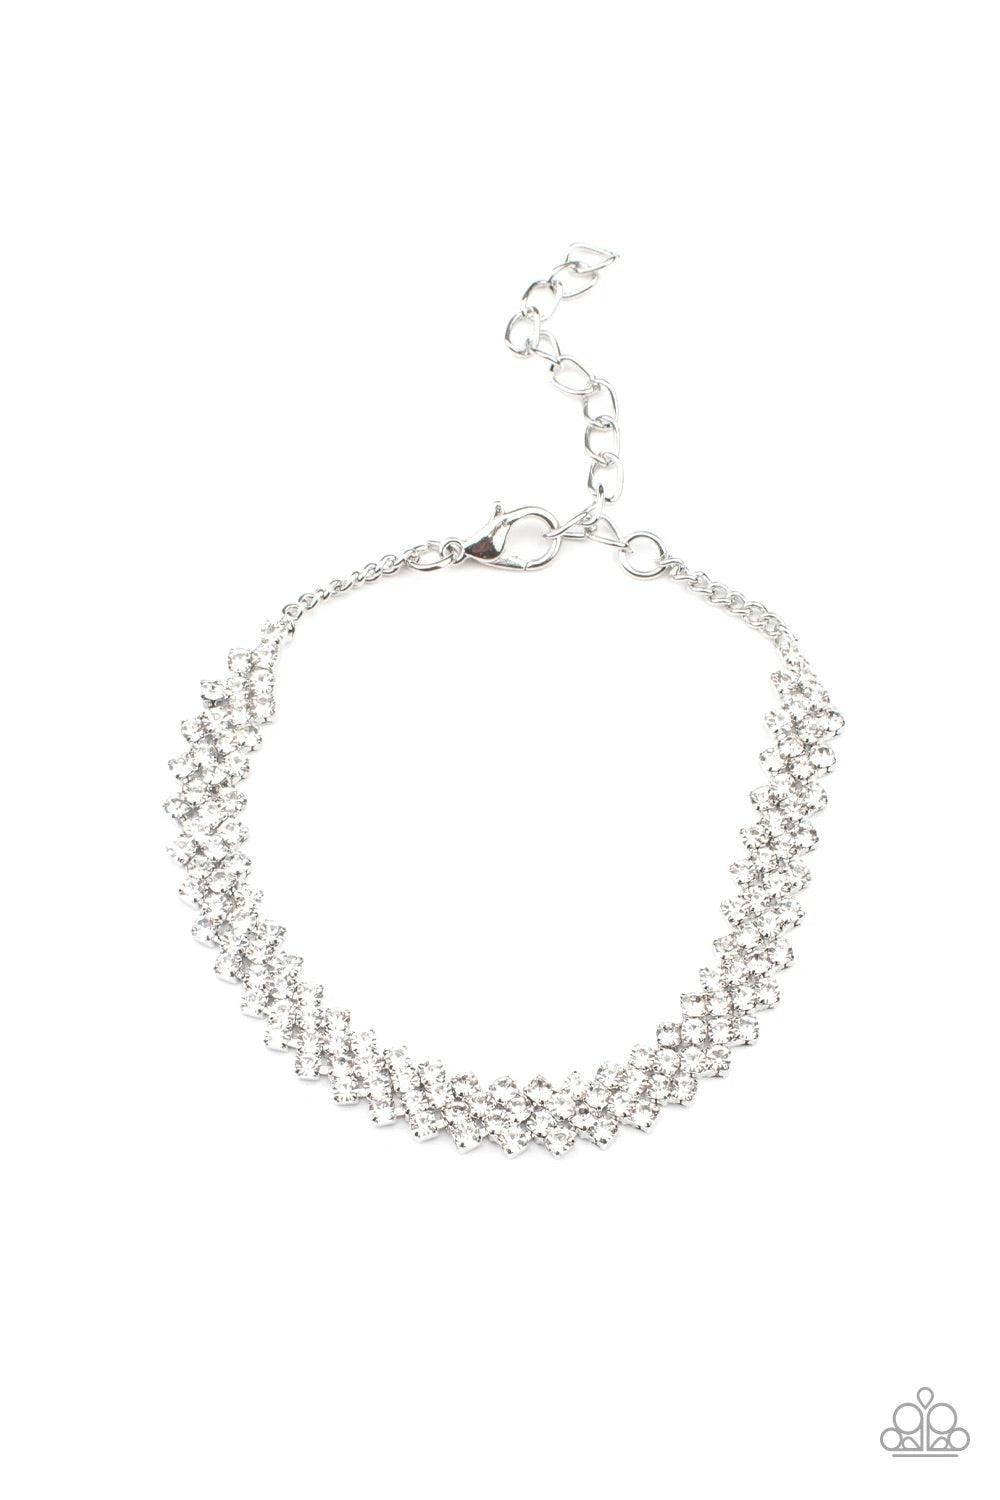 Paparazzi Accessories Chicly Candescent - White Featuring sleek silver fittings, dainty rows of glassy white rhinestones delicately slant across the wrist, coalescing into a timeless centerpiece. Features an adjustable clasp closure. Sold as one individua